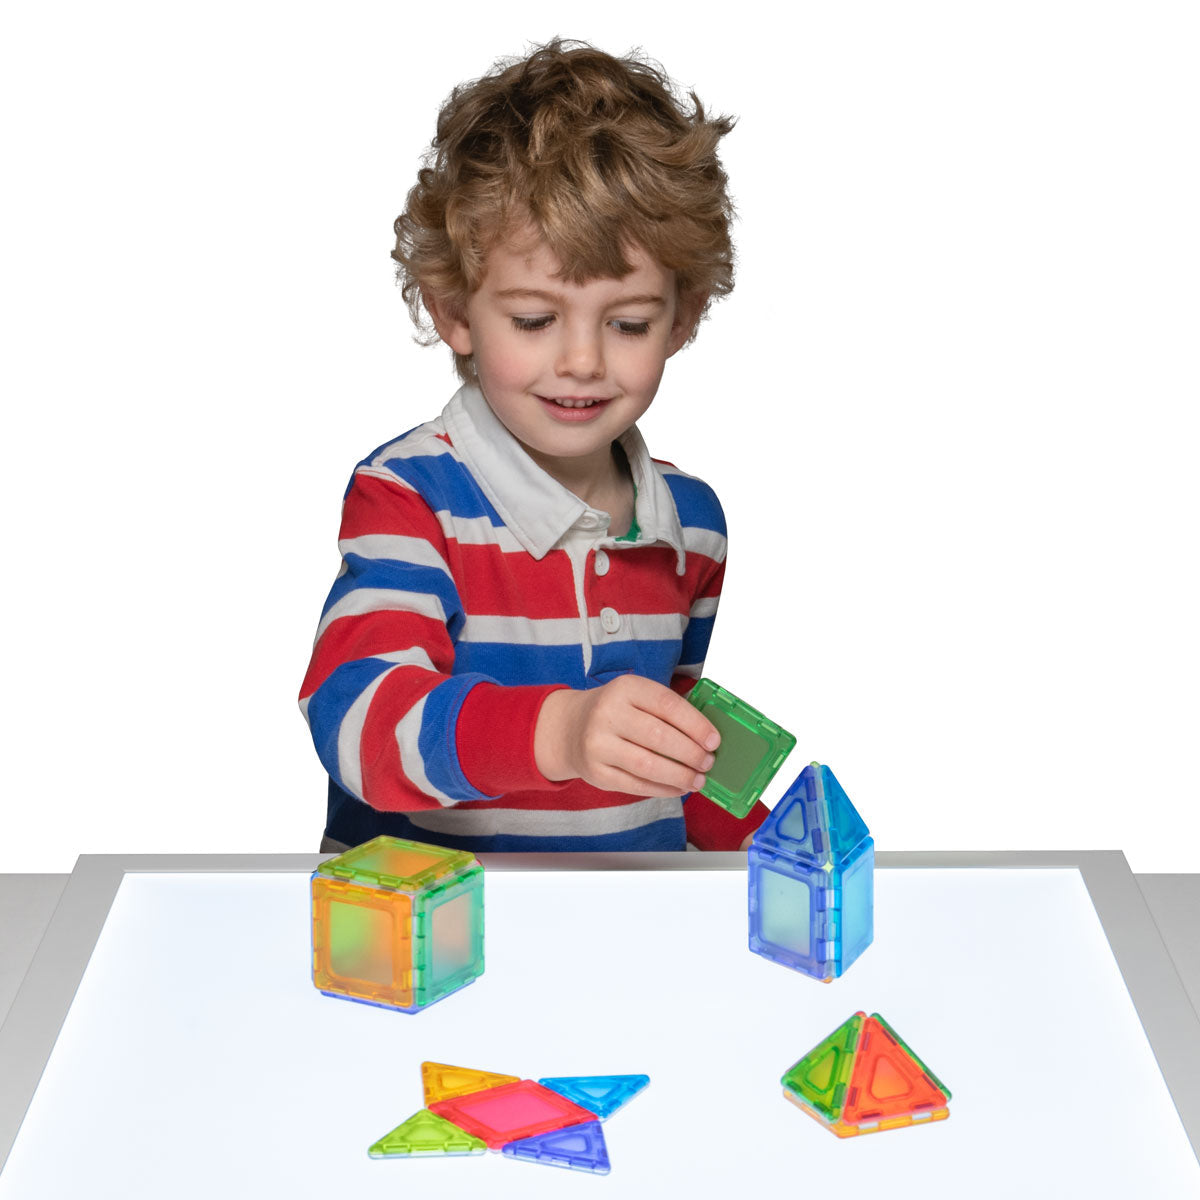 Translucent Solid Magnetic Polydron Starter Set, Introduce young learners to the wonders of shape and construction with the Translucent Solid Magnetic Polydron Starter Set. Designed for small groups of children, this set is perfect for those taking their first steps in building both 2D and 3D shapes.Supplied in 5 mesmerizing translucent colors, these translucent solid pieces capture the imagination and make learning even more exciting. The set is made from MABS material, ensuring durability and longevity fo